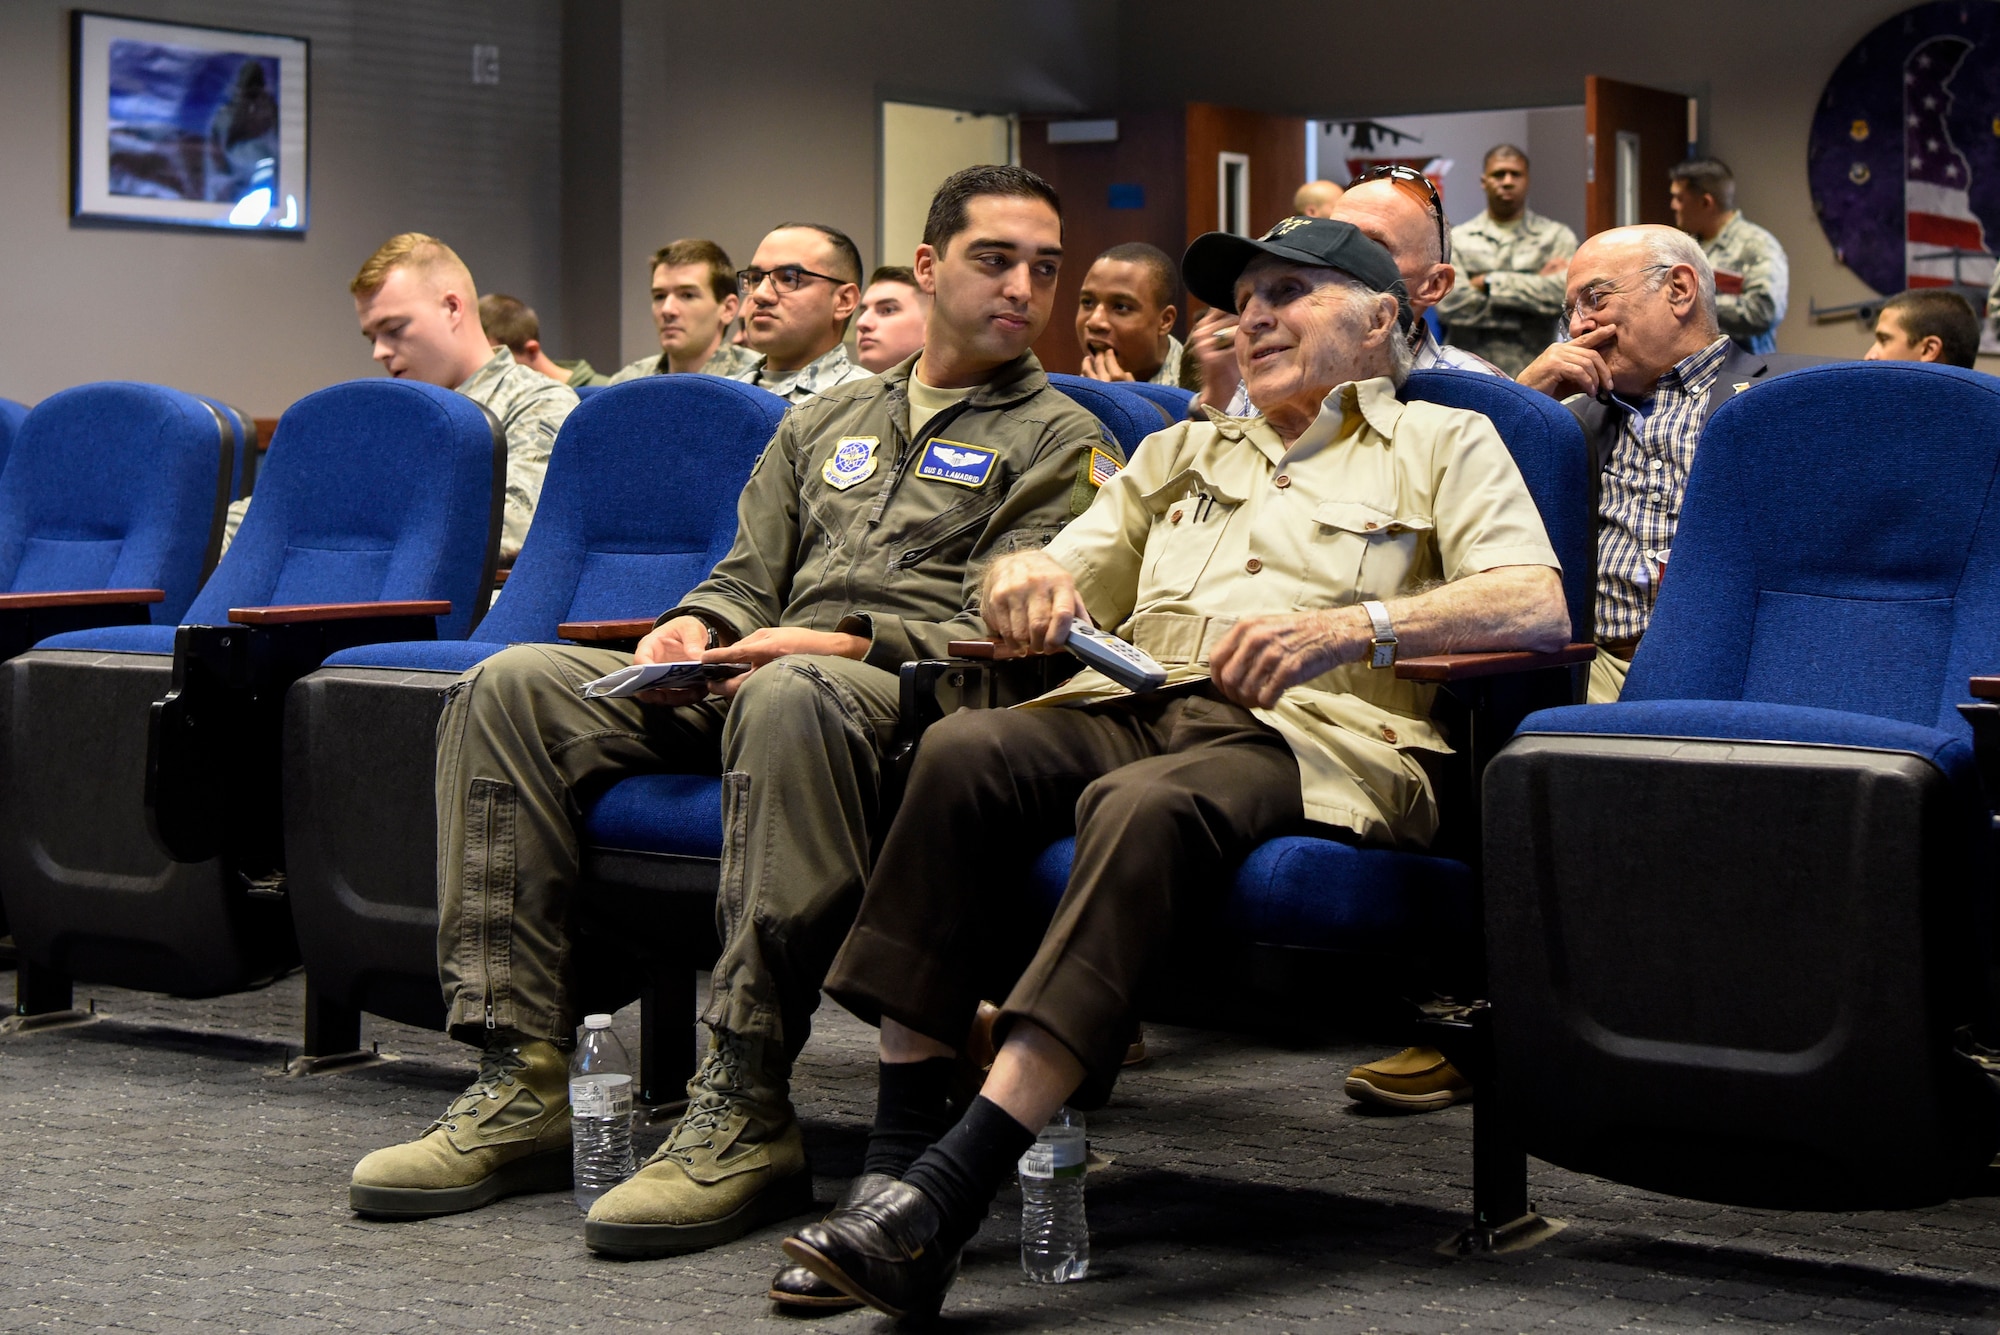 Capt. Gus Lamadrid, 3rd Airlift Squadron C-17 Globemaster III pilot, talks to retired Army Air Corps 1st Lt. Ray Firmani, World War II B-17 pilot, during the quarterly Hangar Talk May 10, 2018, at Dover Air Force Base, Del. Lamadrid led the discussion during the heritage event by hosting a question and answer session with Firmani. (U.S. Air Force photo by Airman 1st Class Zoe M. Wockenfuss)